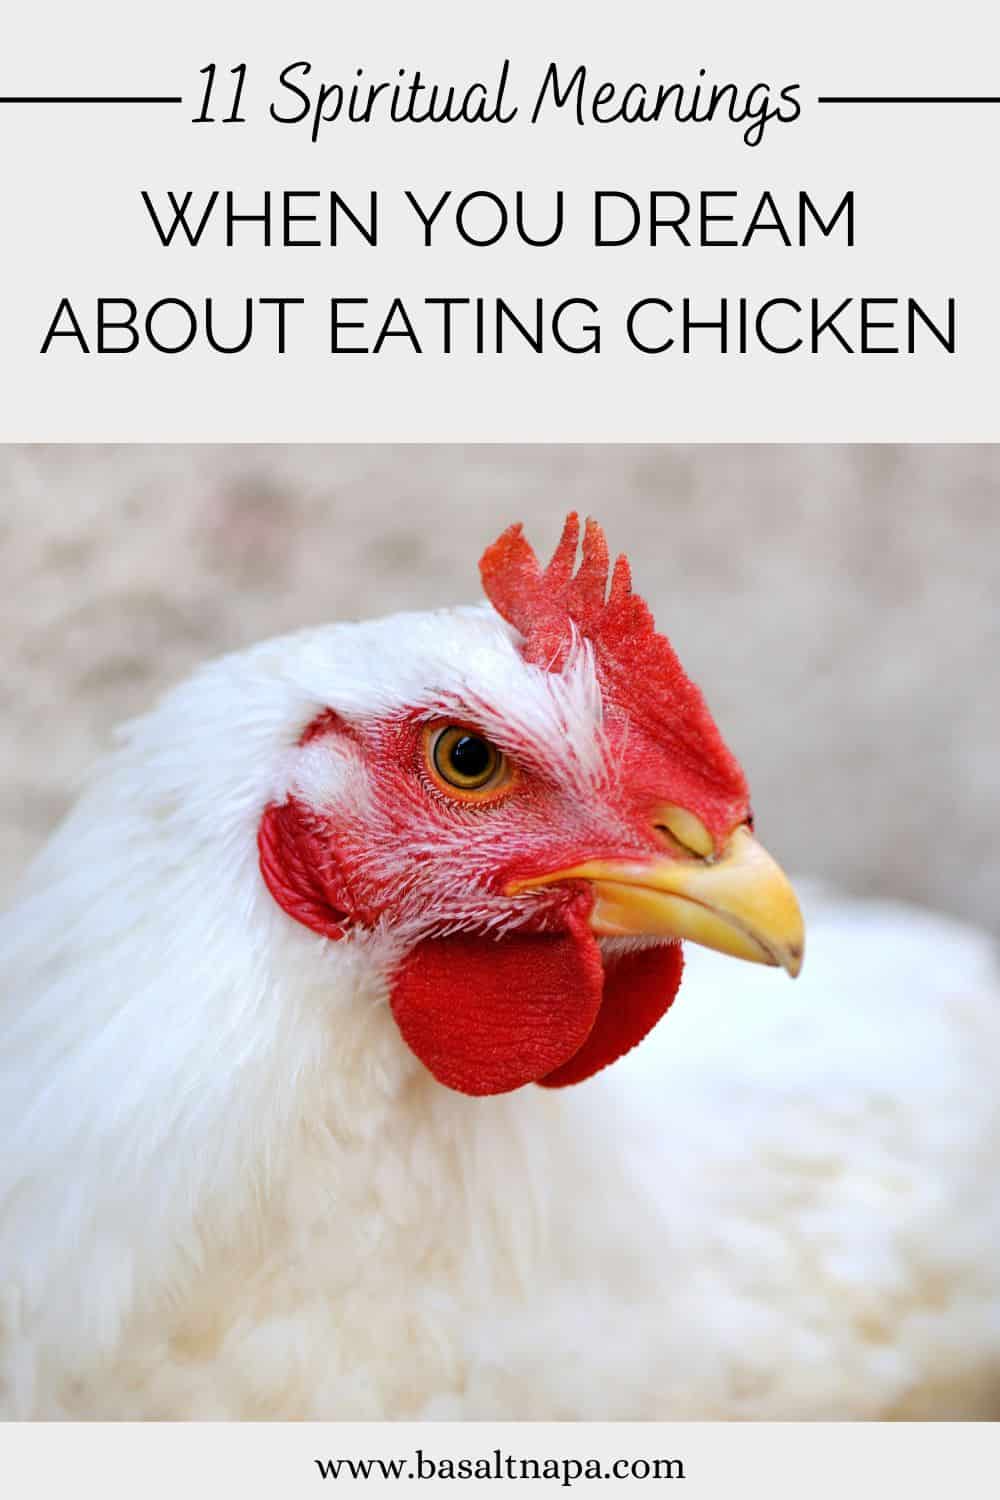 11 Spiritual Meanings When You Dream about Eating Chicken